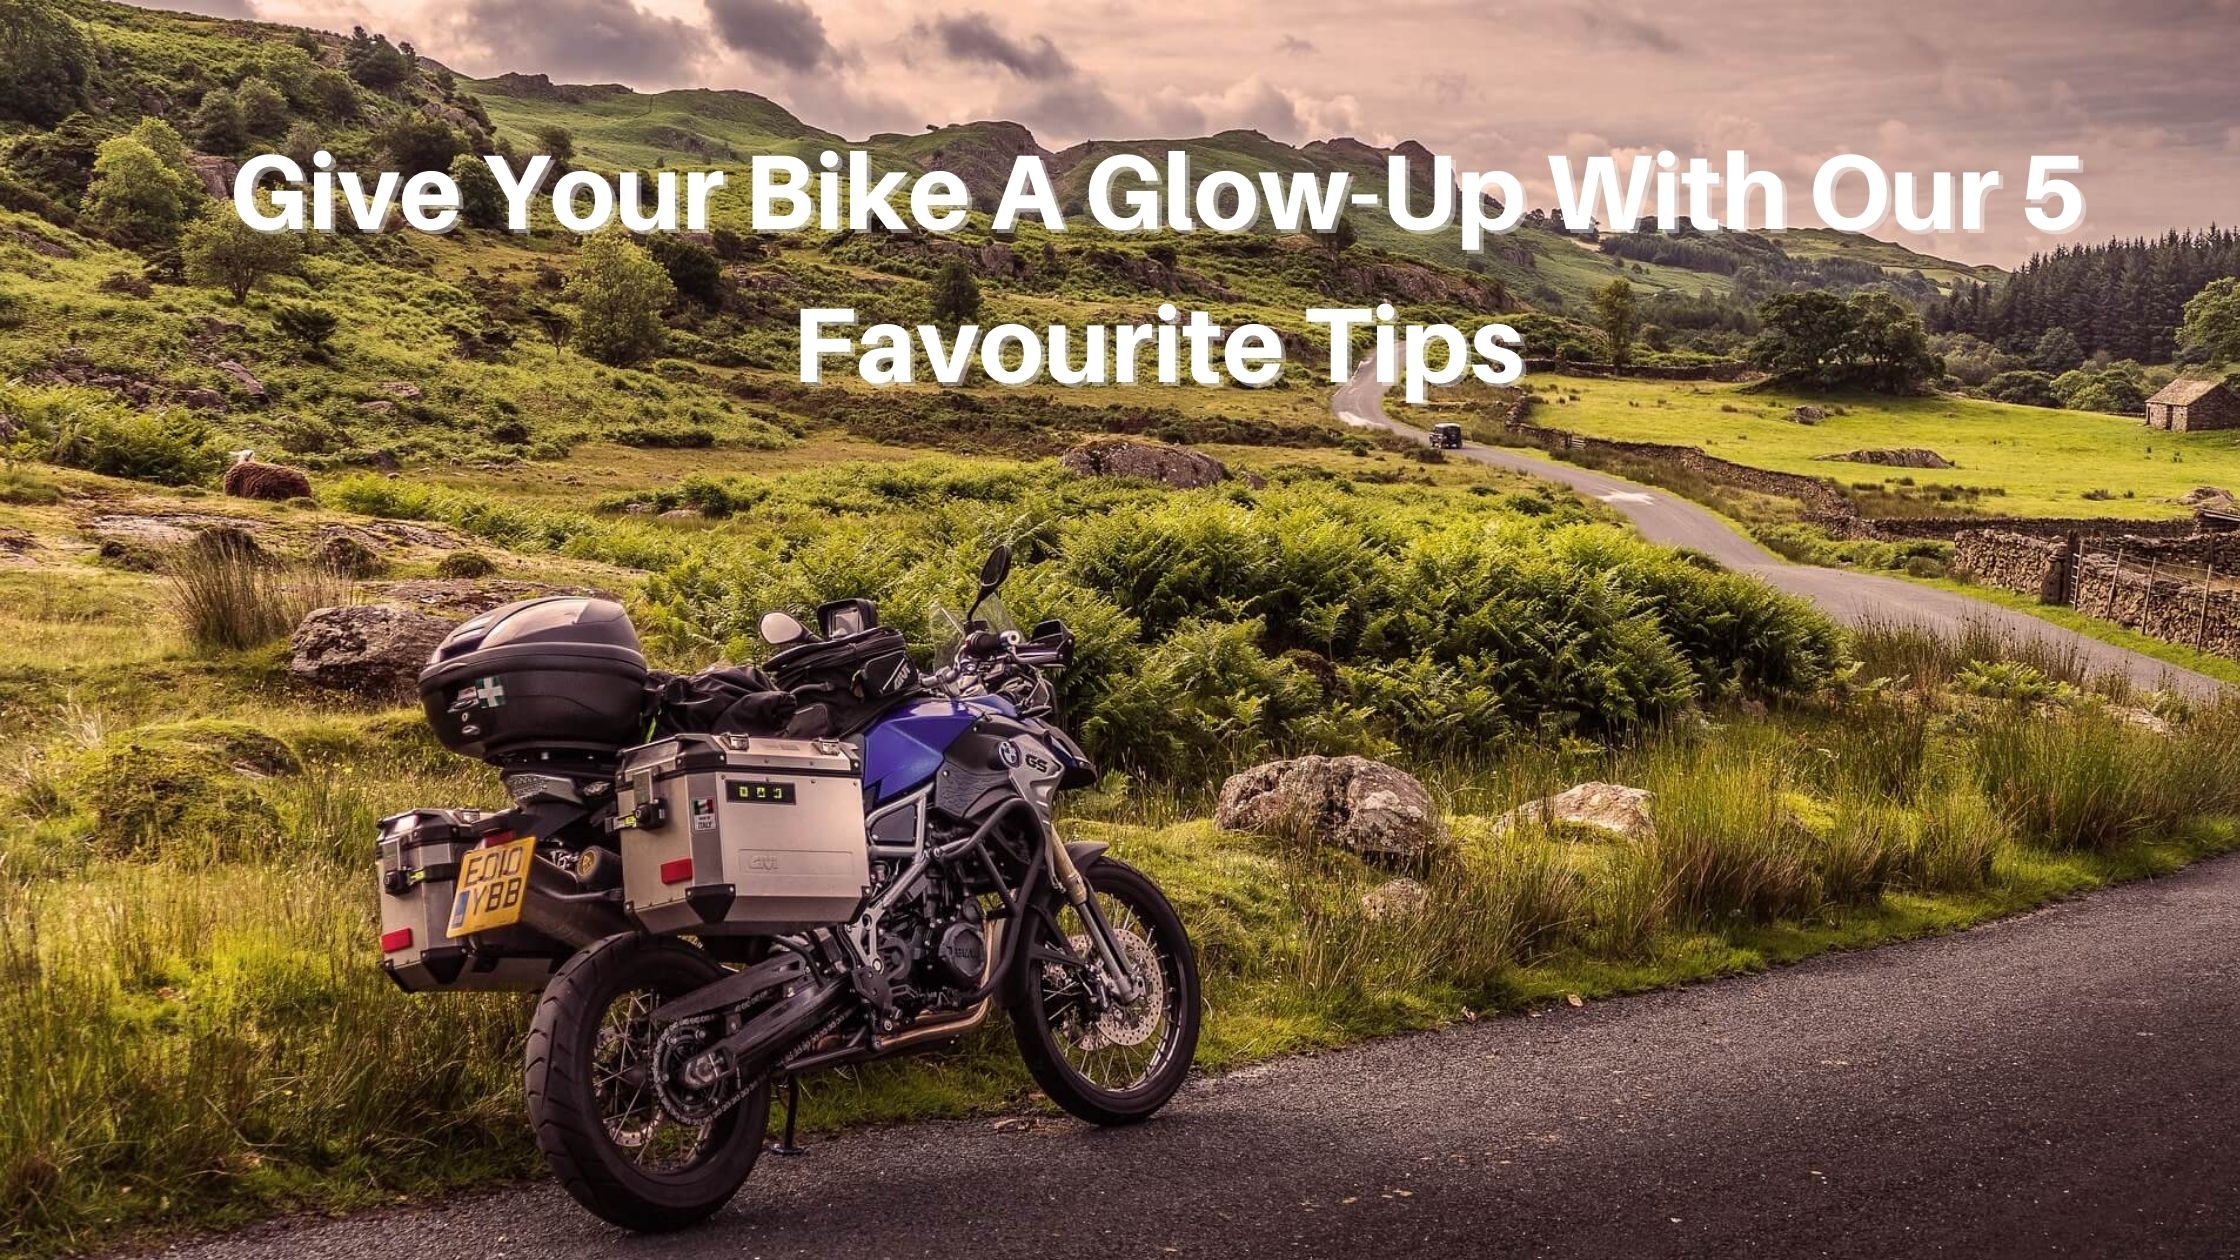 Give Your Bike A Glow-Up With Our 5 Favourite Tips